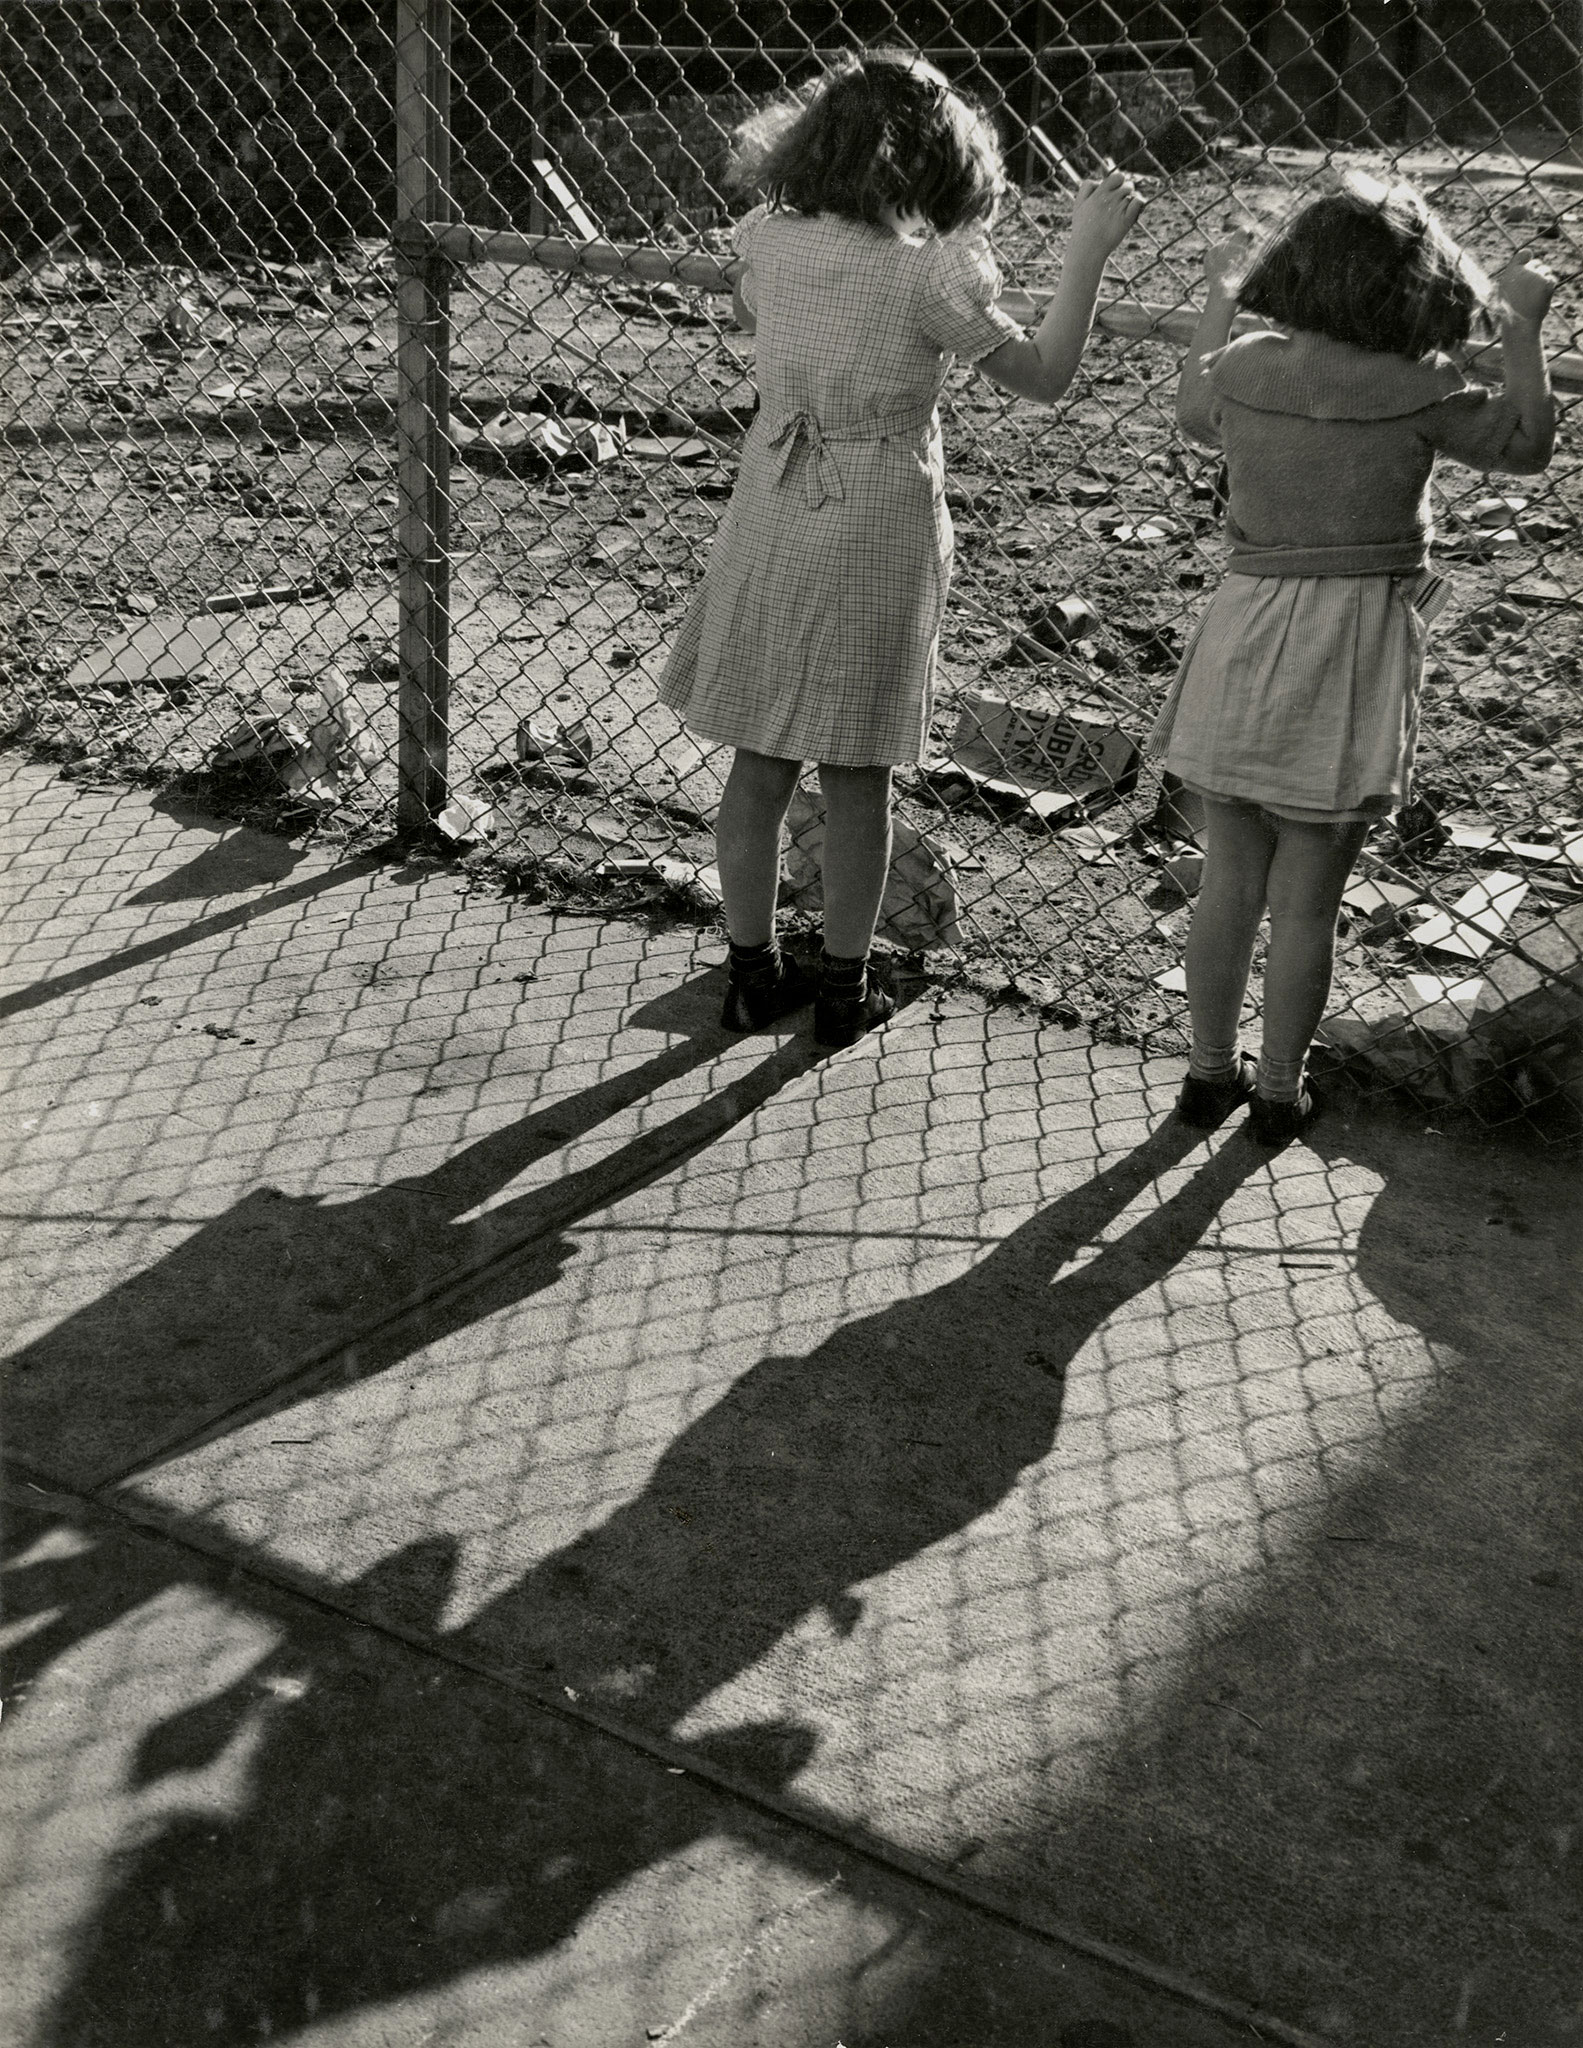 A wire fence is put up to keep trespassers out, from Playgrounds for Manhattan, 1938